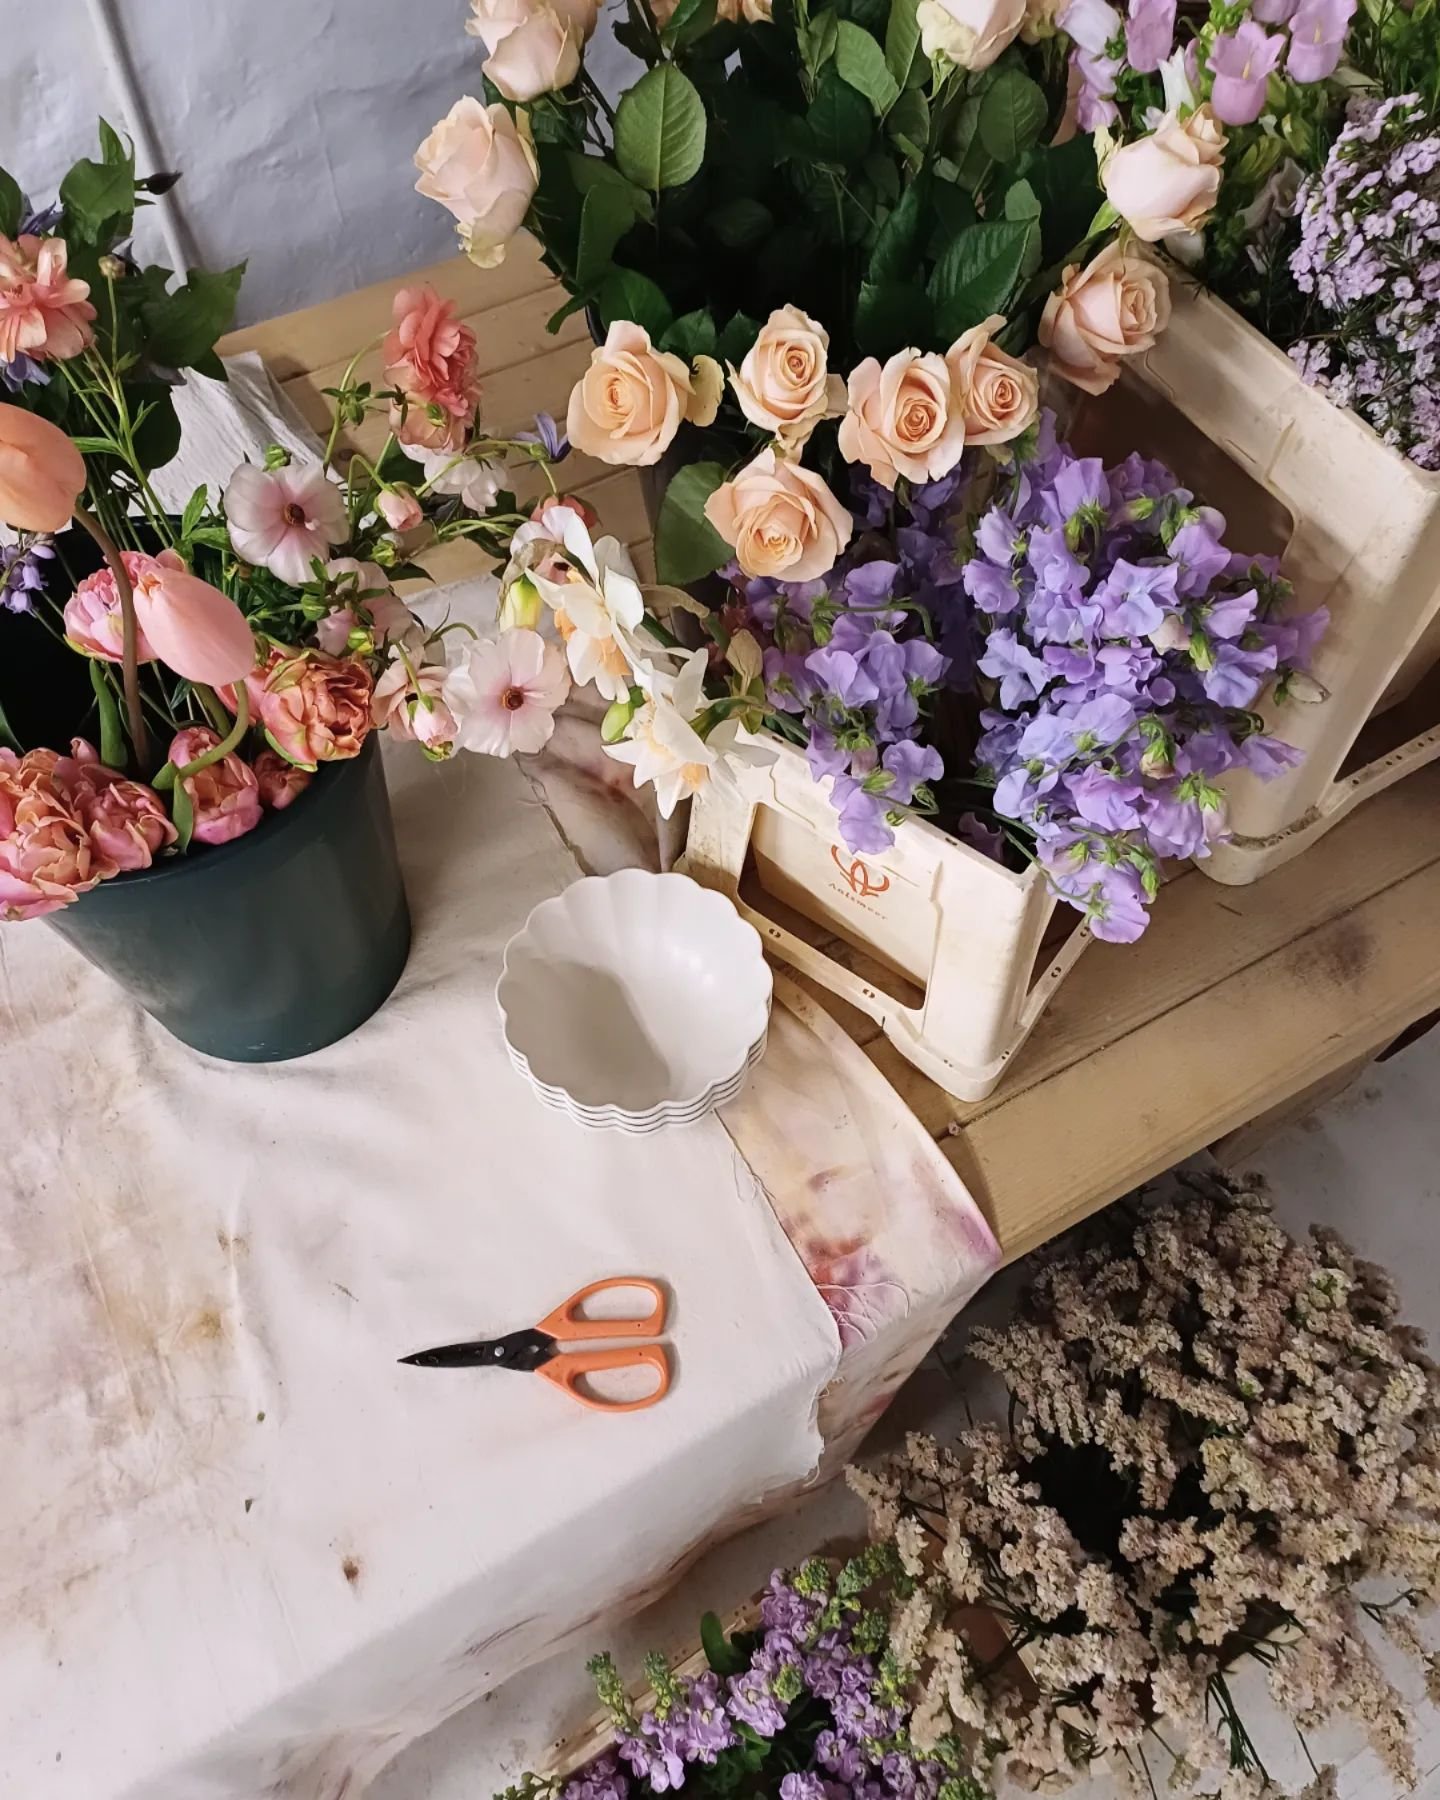 A glimpse behind the scenes in my studio. This is my workbench - it's where I condition and arrange your flowers, steep dye baths, and gather students for Dove &amp; Myrtle workshops. It's seen it all and could most definitely tell a tale or two 💫
.